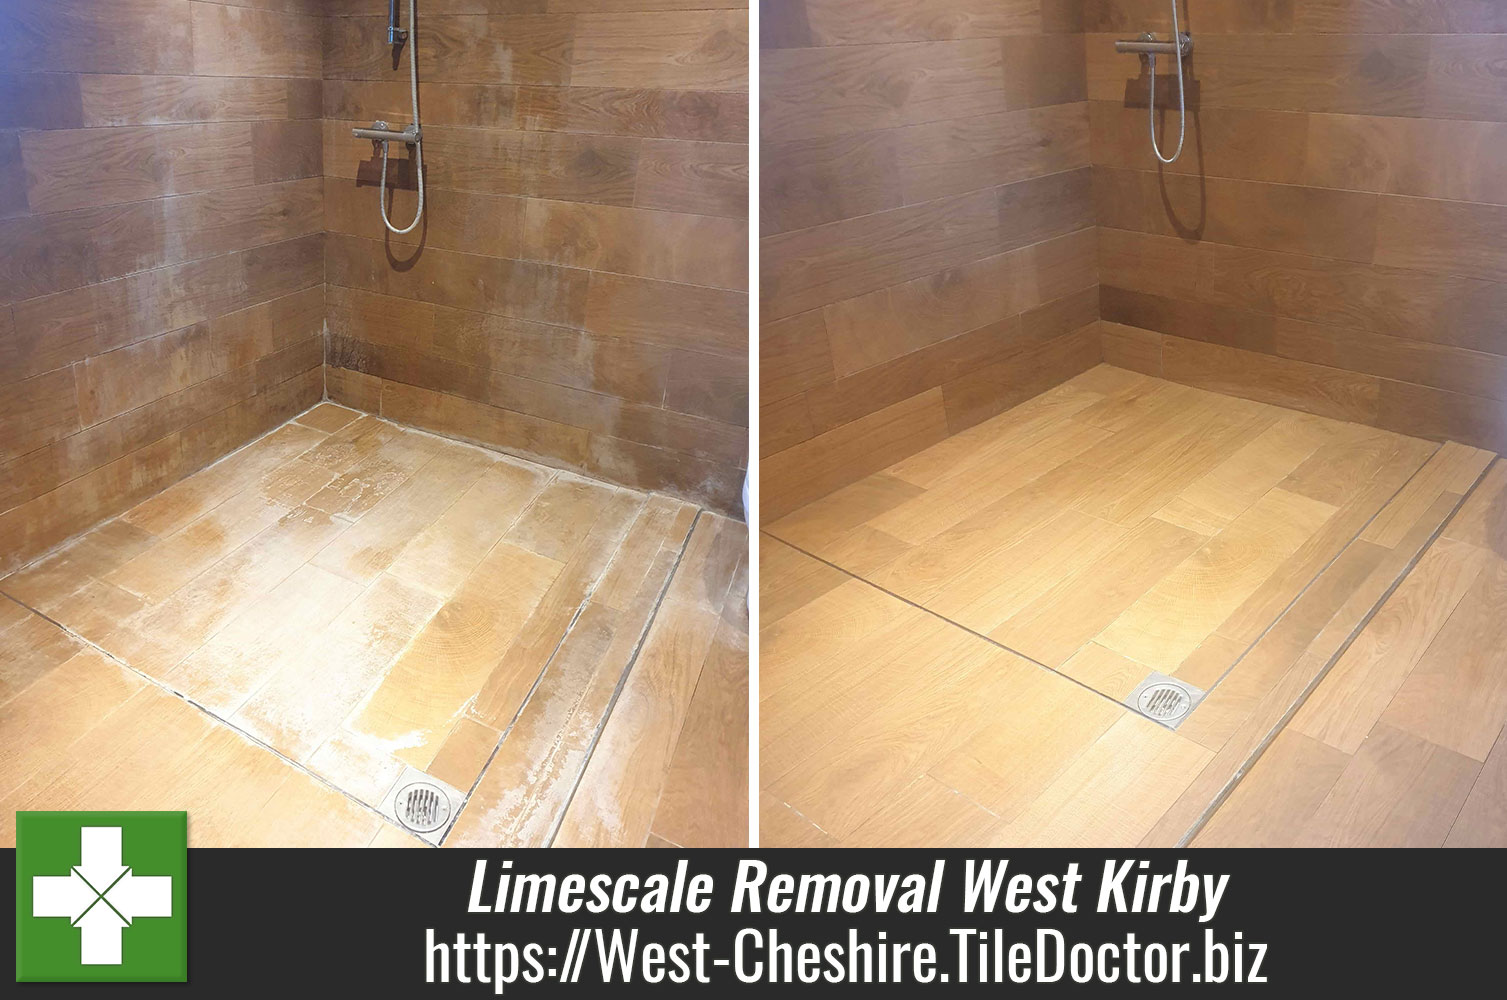 Removing Limescale from Ceramic Shower Tiles with Acid Gel in West Kirby Cheshire